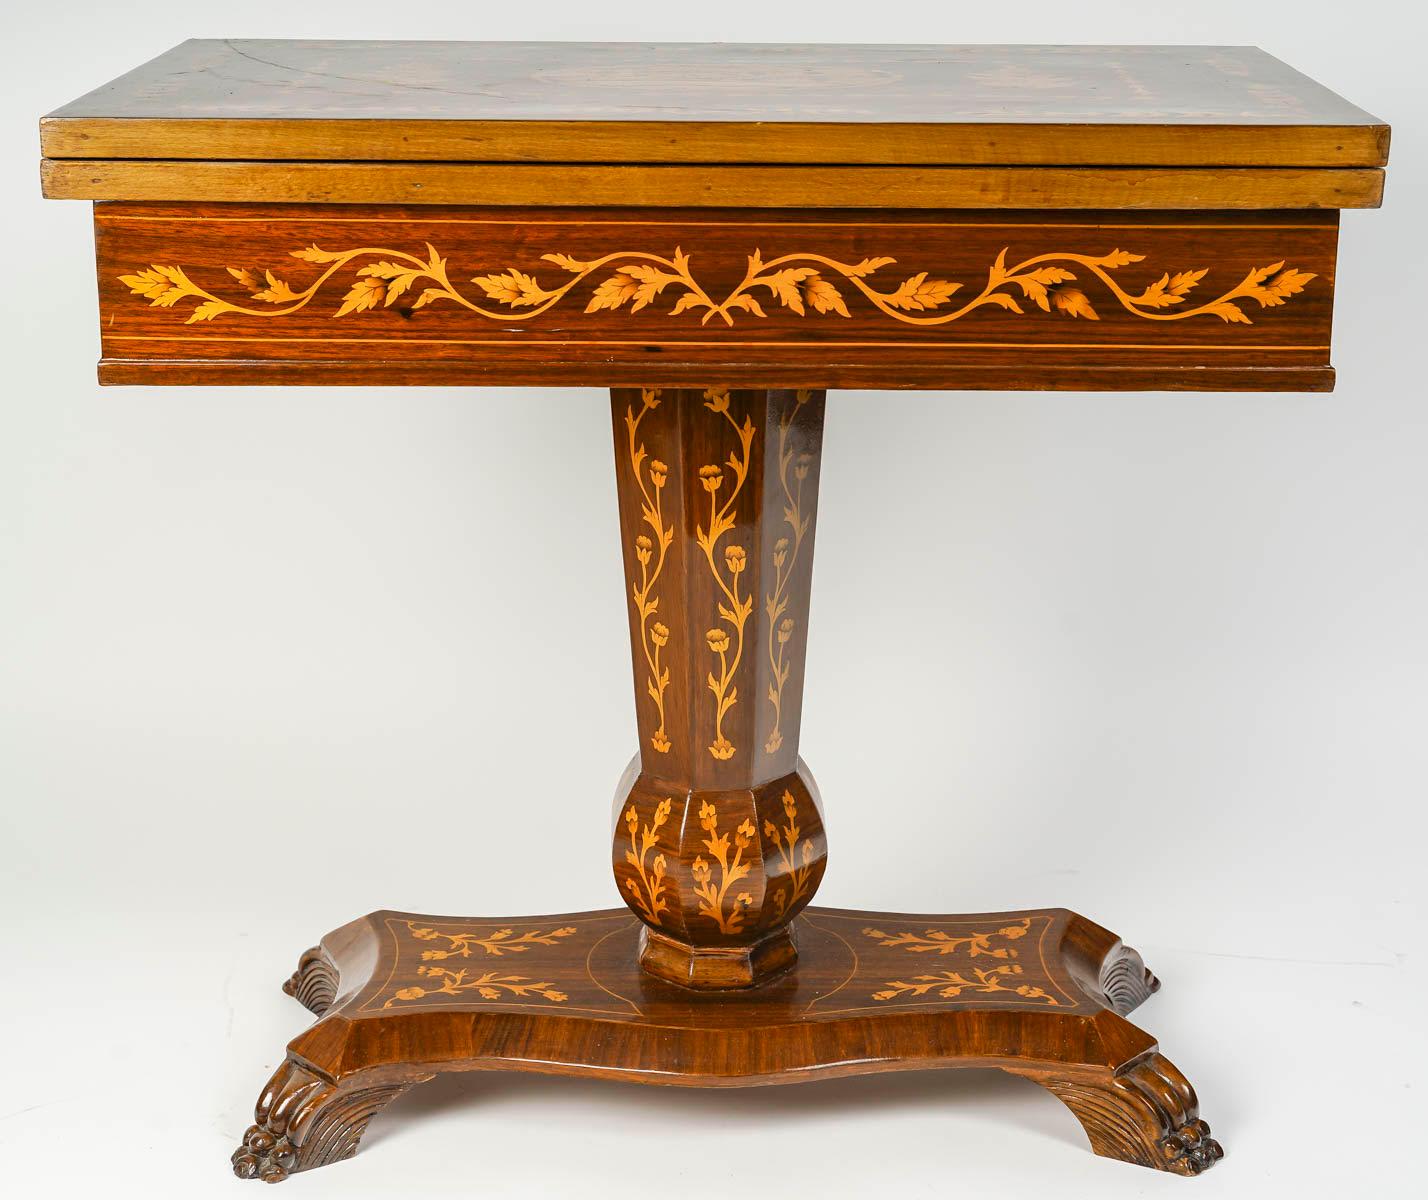 Chessboard, Backgammon Table, Wooden Marquetry Games Table, Early 20th Century.

Chessboard, Backgammon table, games table, early 20th century, carved wood chess pawn.
h: 72cm, w: 77cm, d: 41.5cm
Open: H: 72cm, W: 77cm, D: 83cm